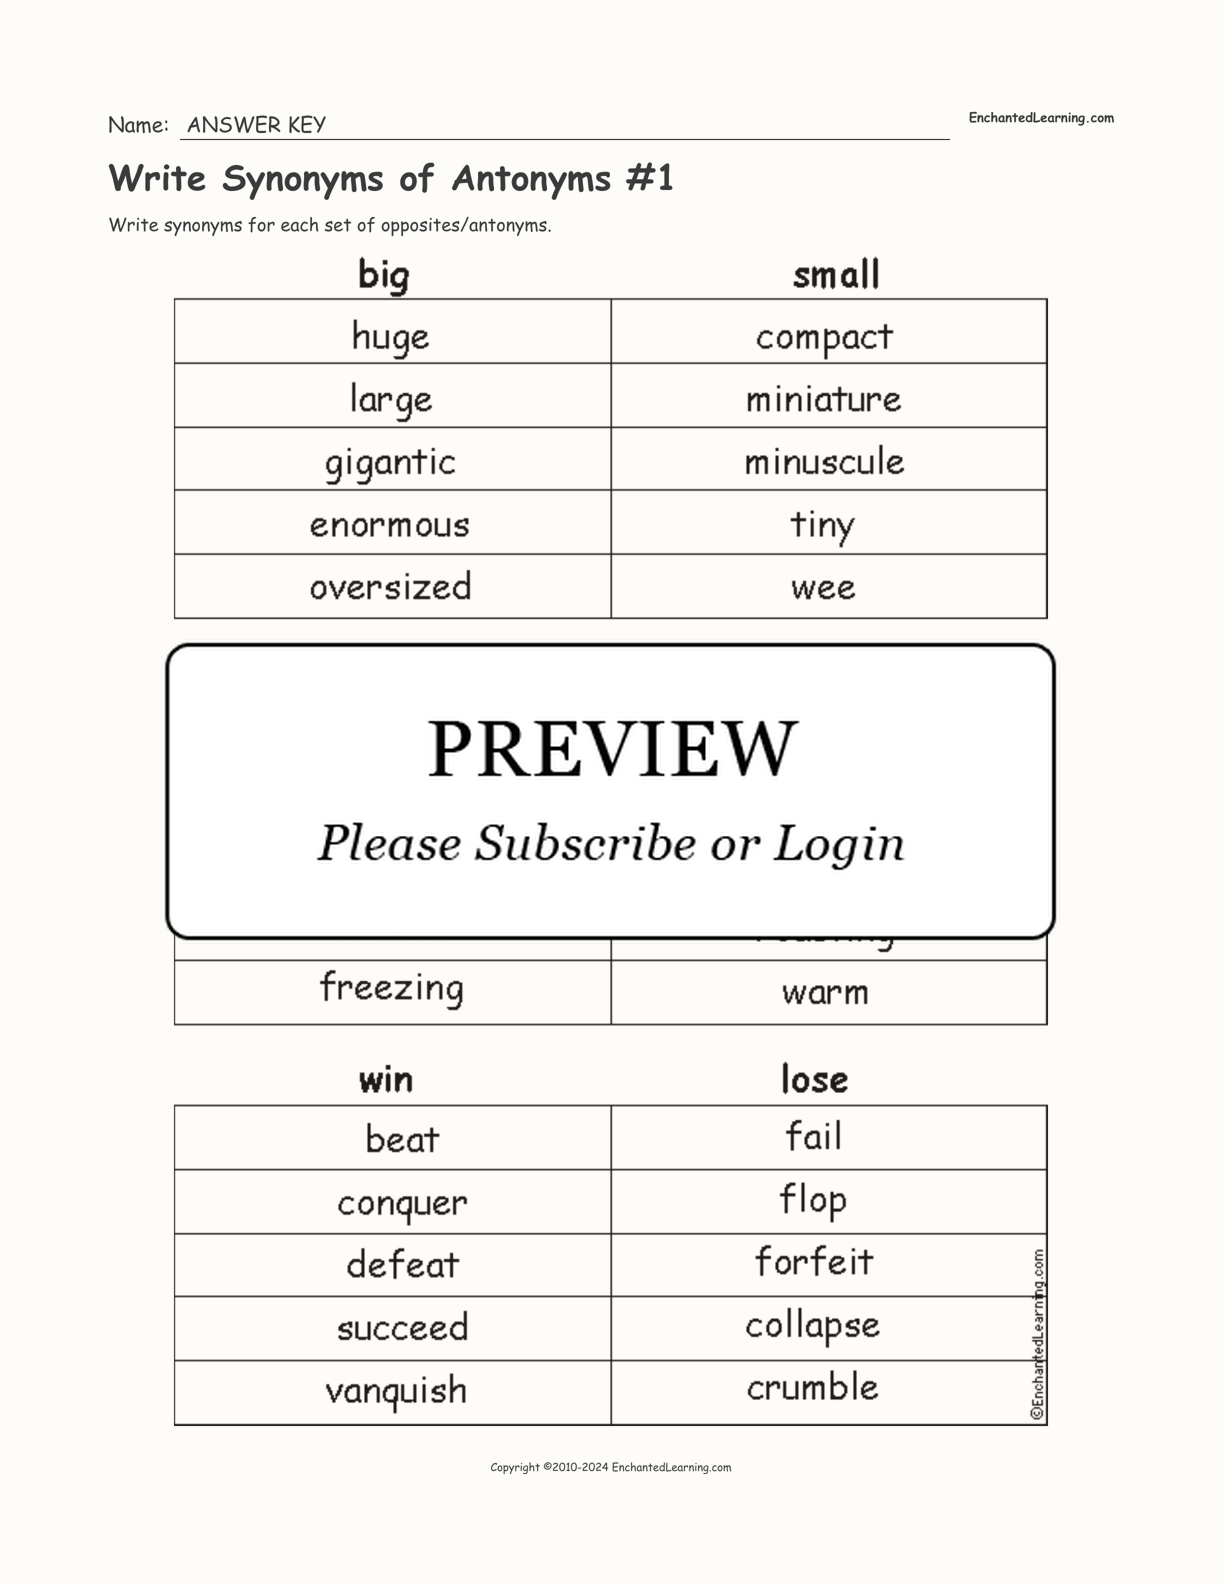 Write Synonyms of Antonyms #1 interactive worksheet page 2